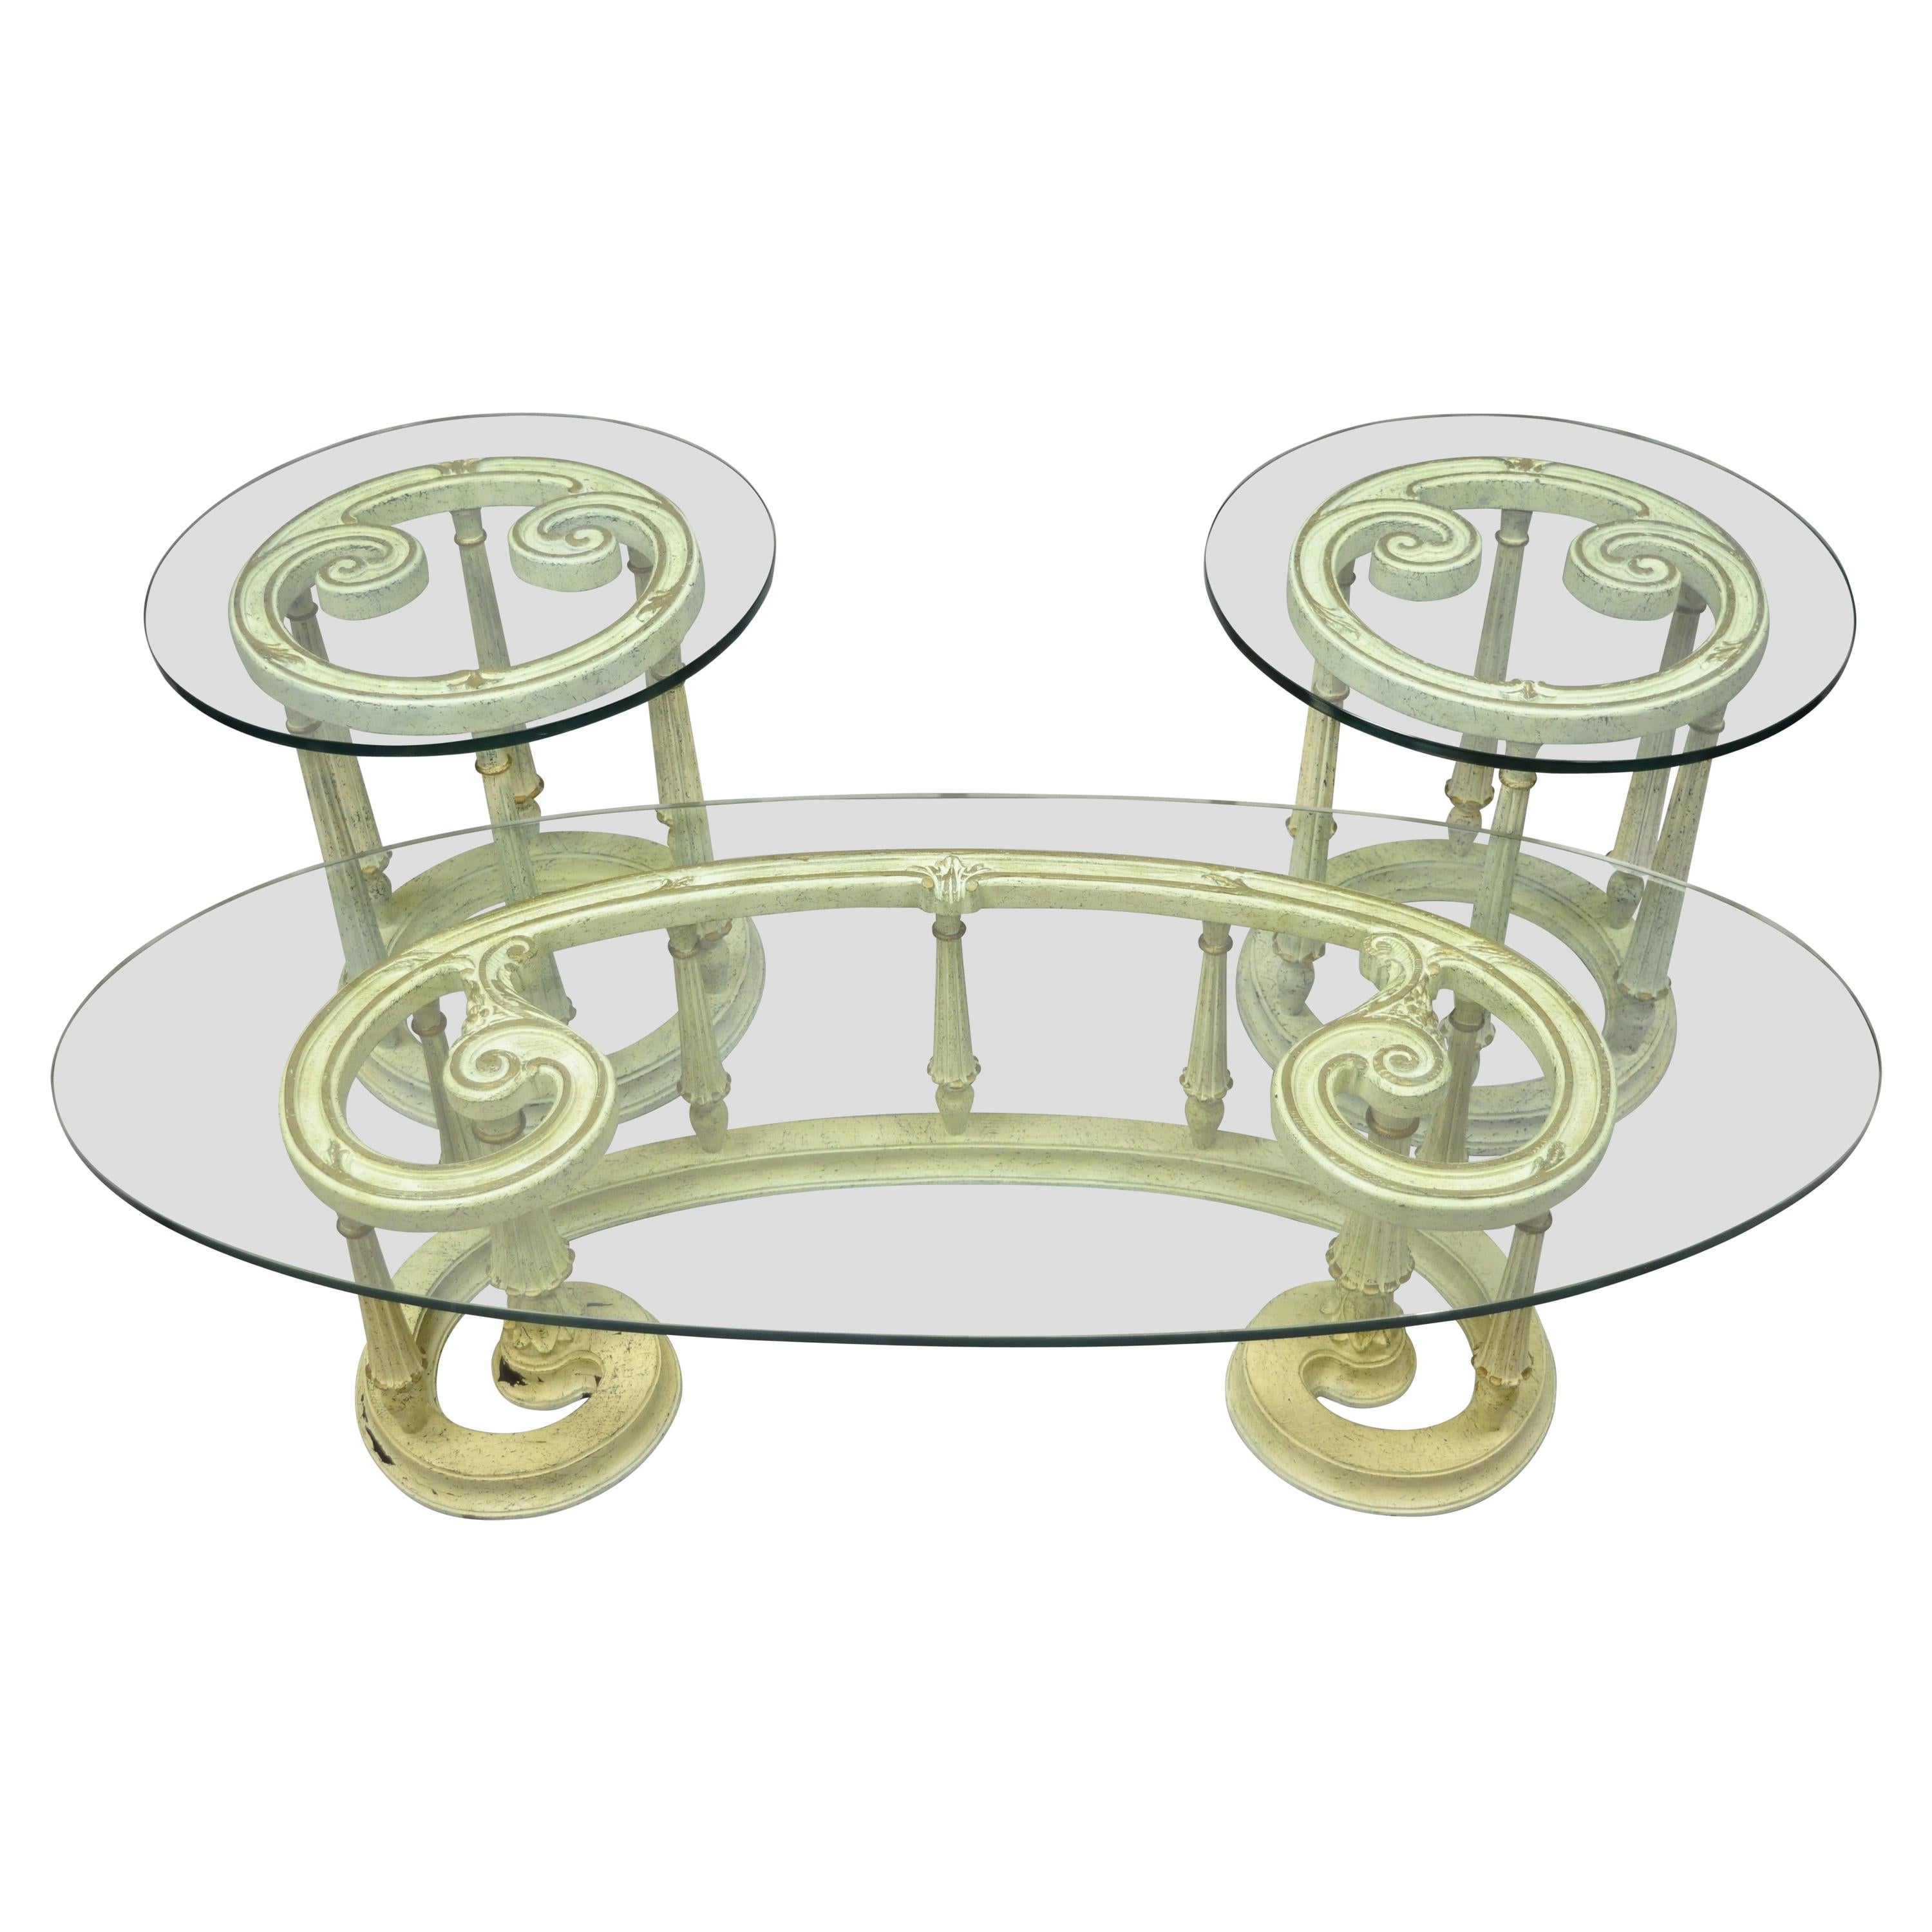 French Provincial Italian Scrollwork Wood Base Glass Top Coffee Table, 3 Pc Set